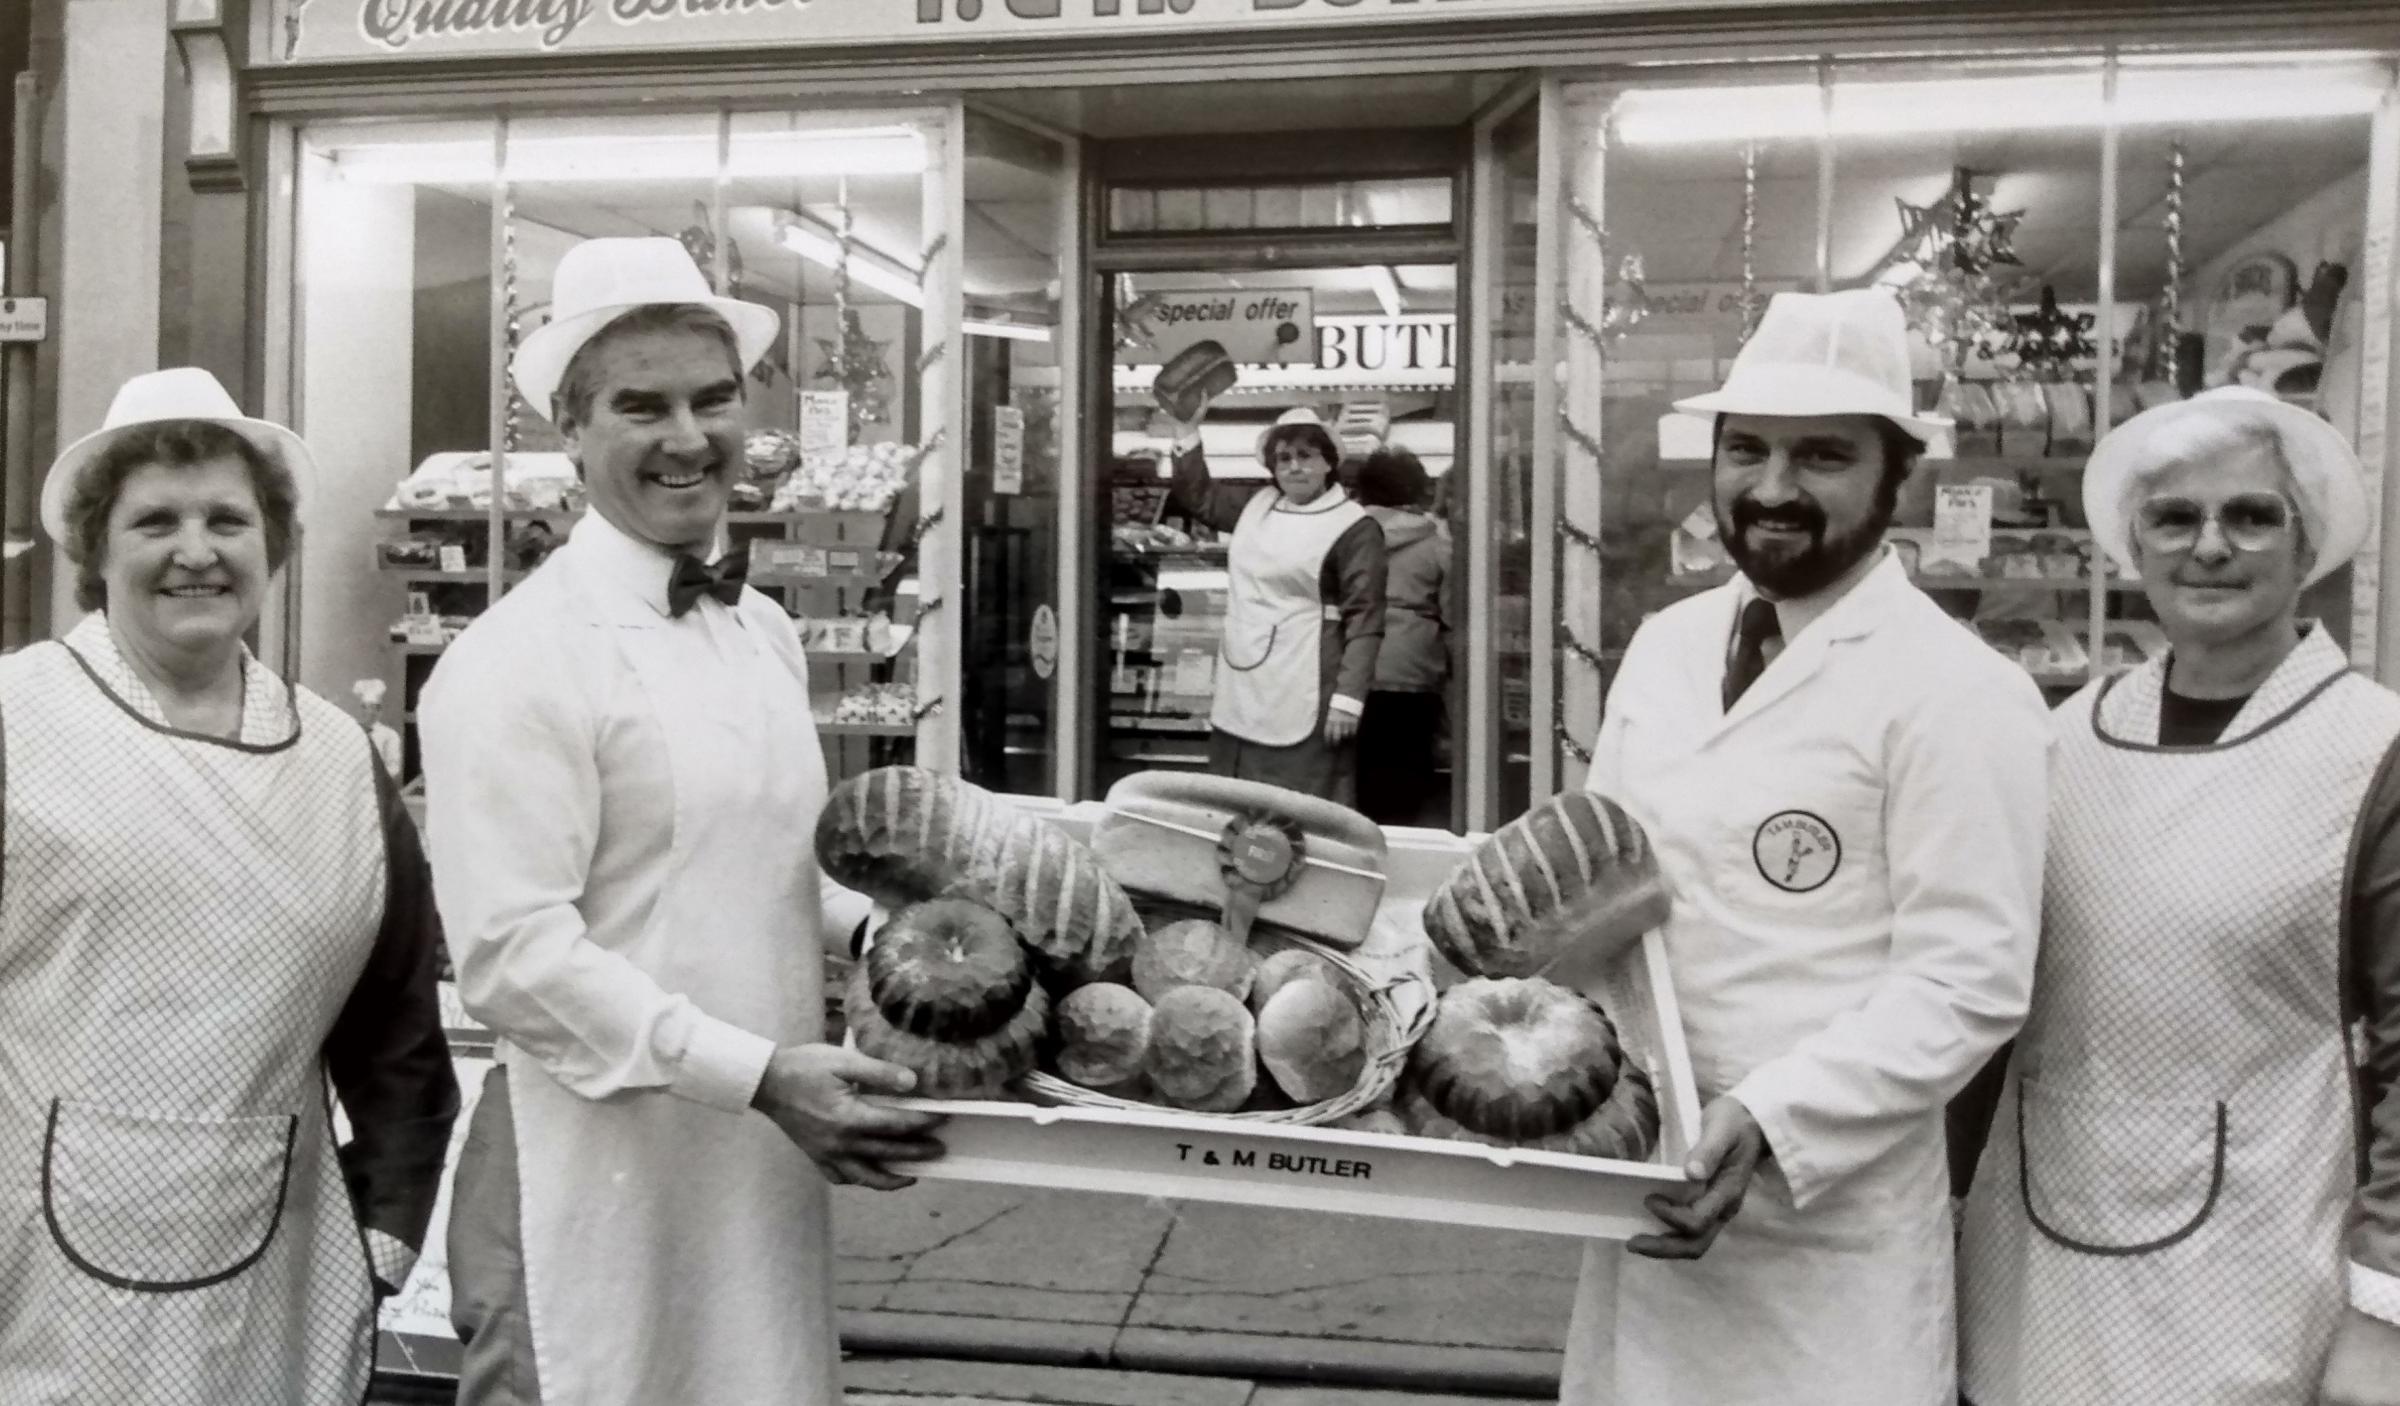 The T&M Butler team showing off some of the bakery’s fare for an advertising feature in December 1990. Do you remember using the bakery?